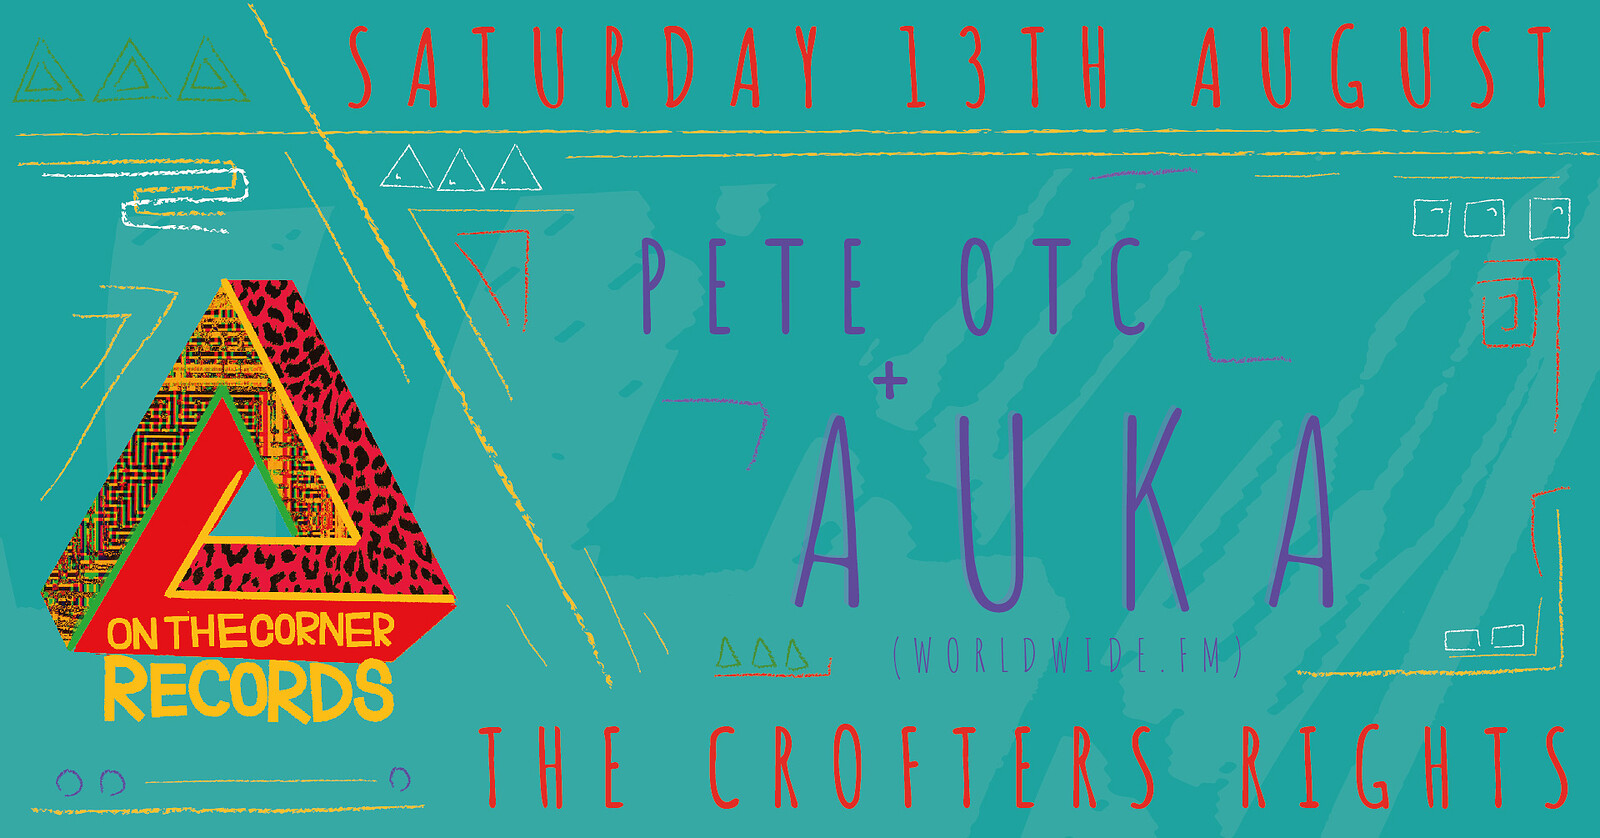 On The Corner: Pete OTC + Auka at Crofters Rights